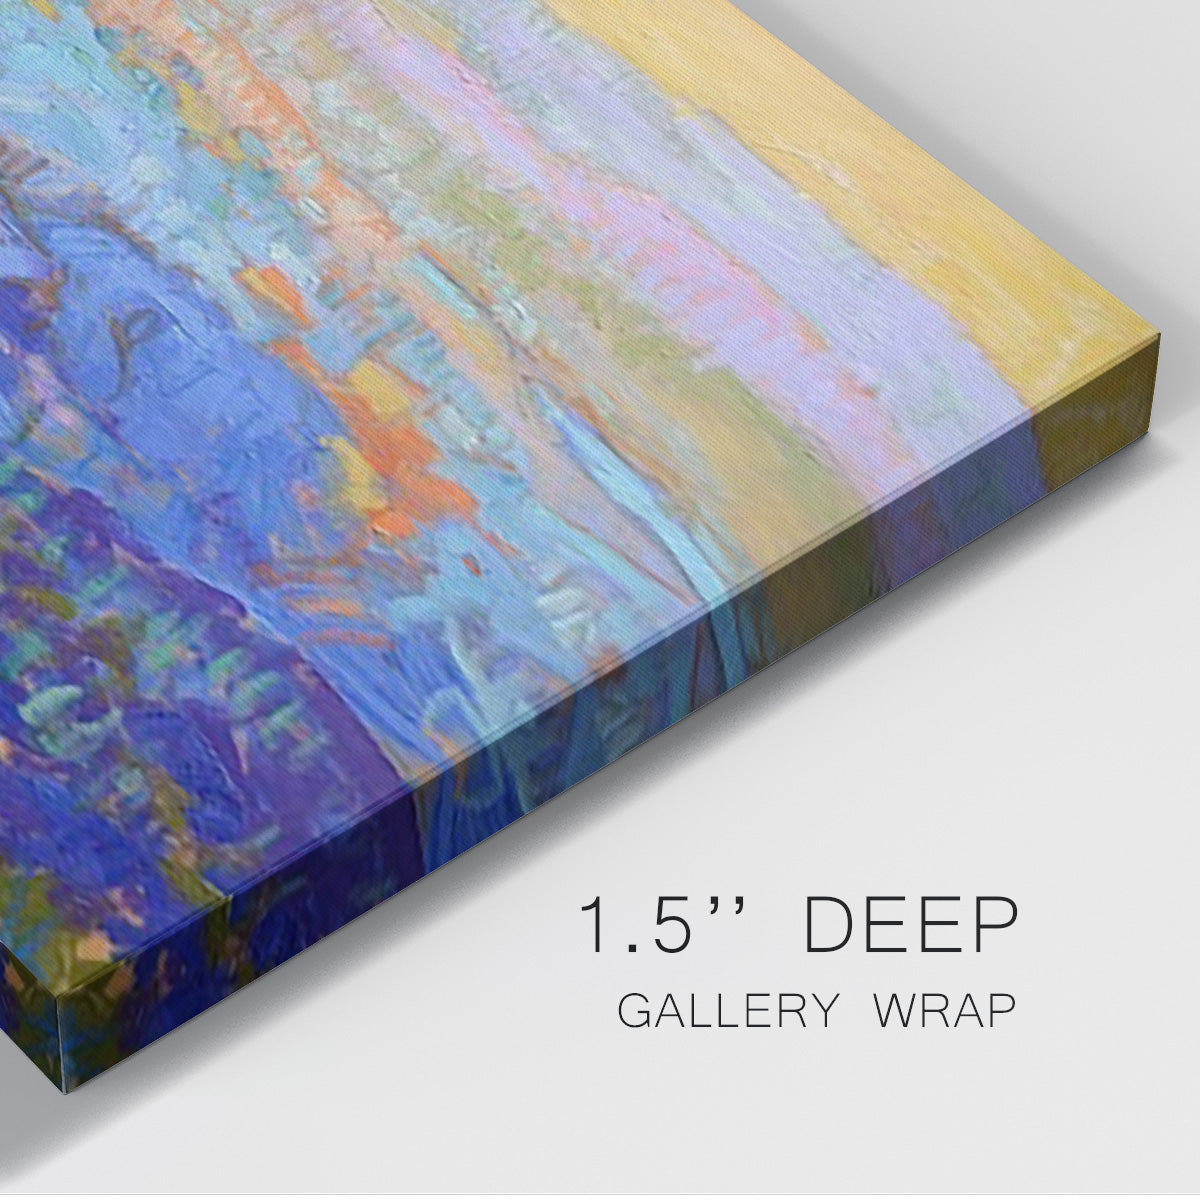 Meet Me and the Edge of Dreams Premium Gallery Wrapped Canvas - Ready to Hang